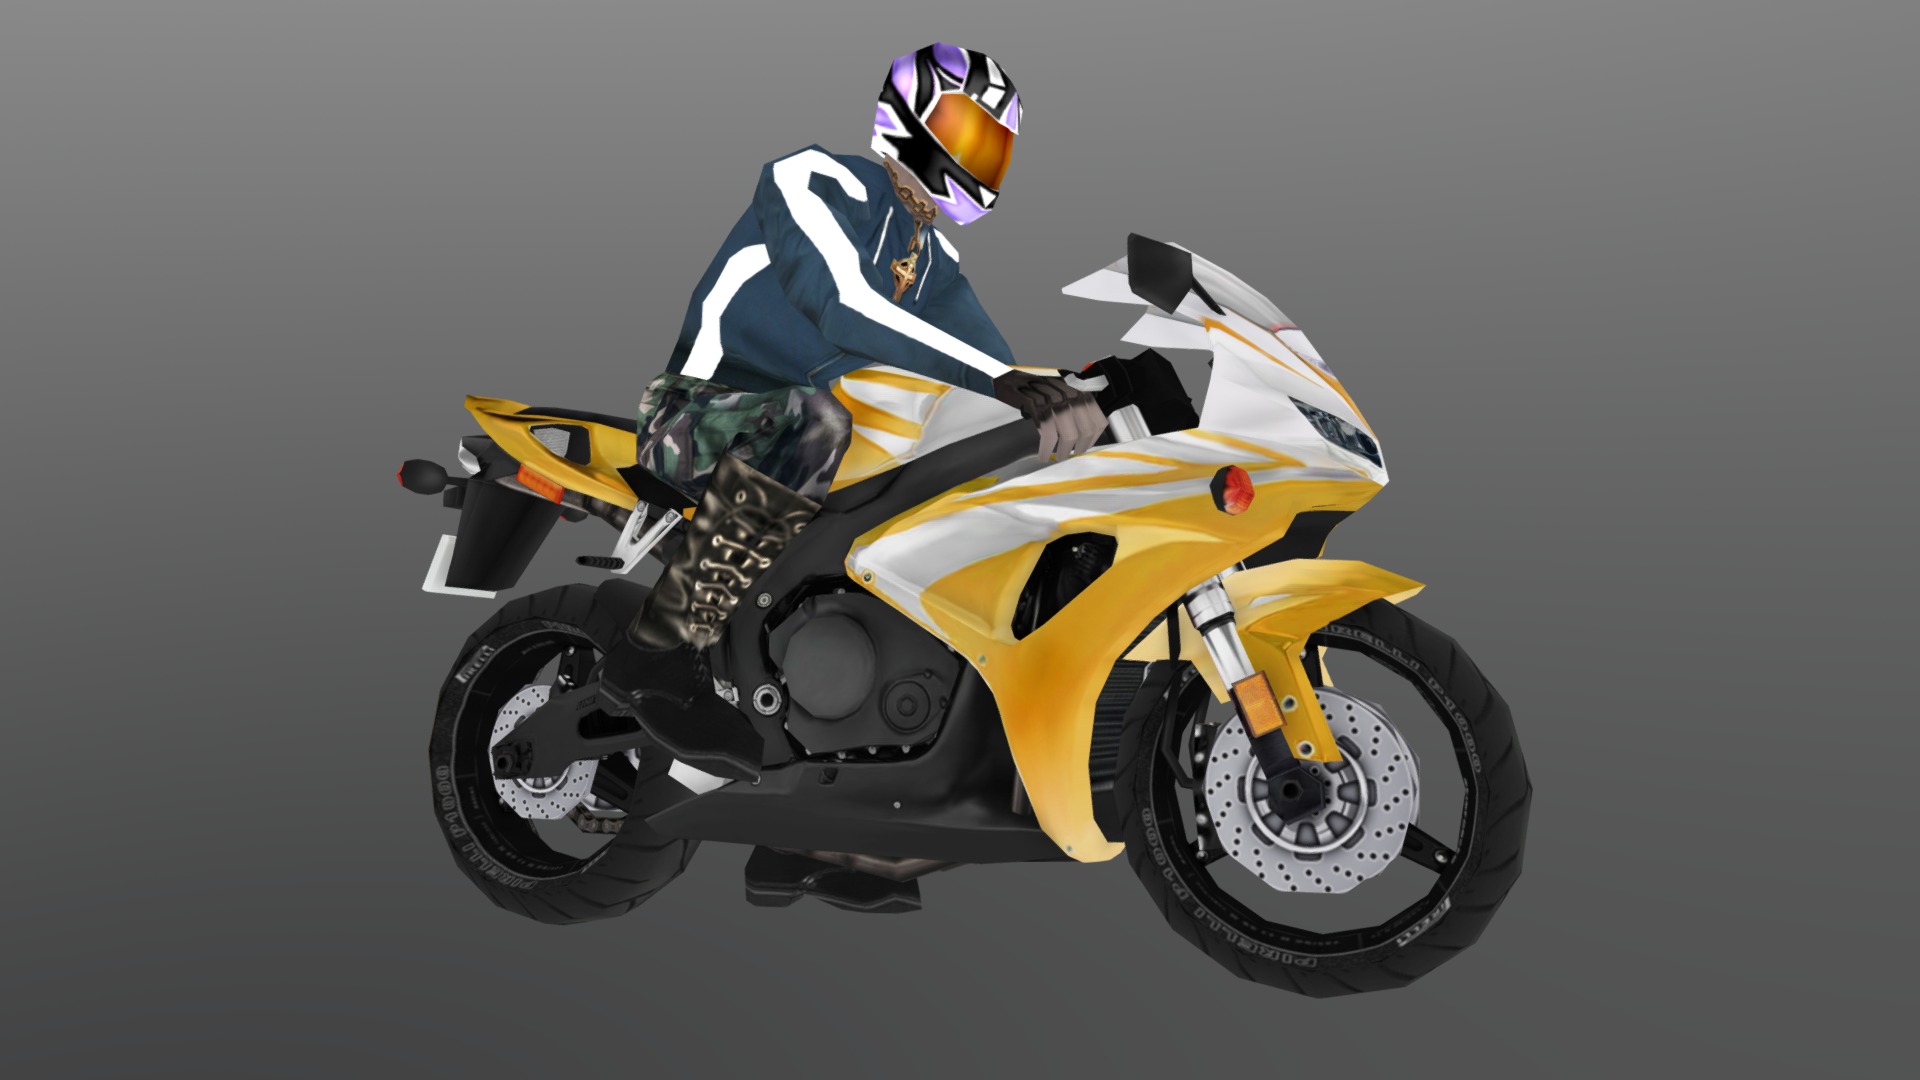 3D model Biker on the sport-bike - This is a 3D model of the Biker on the sport-bike. The 3D model is about a person on a motorcycle.